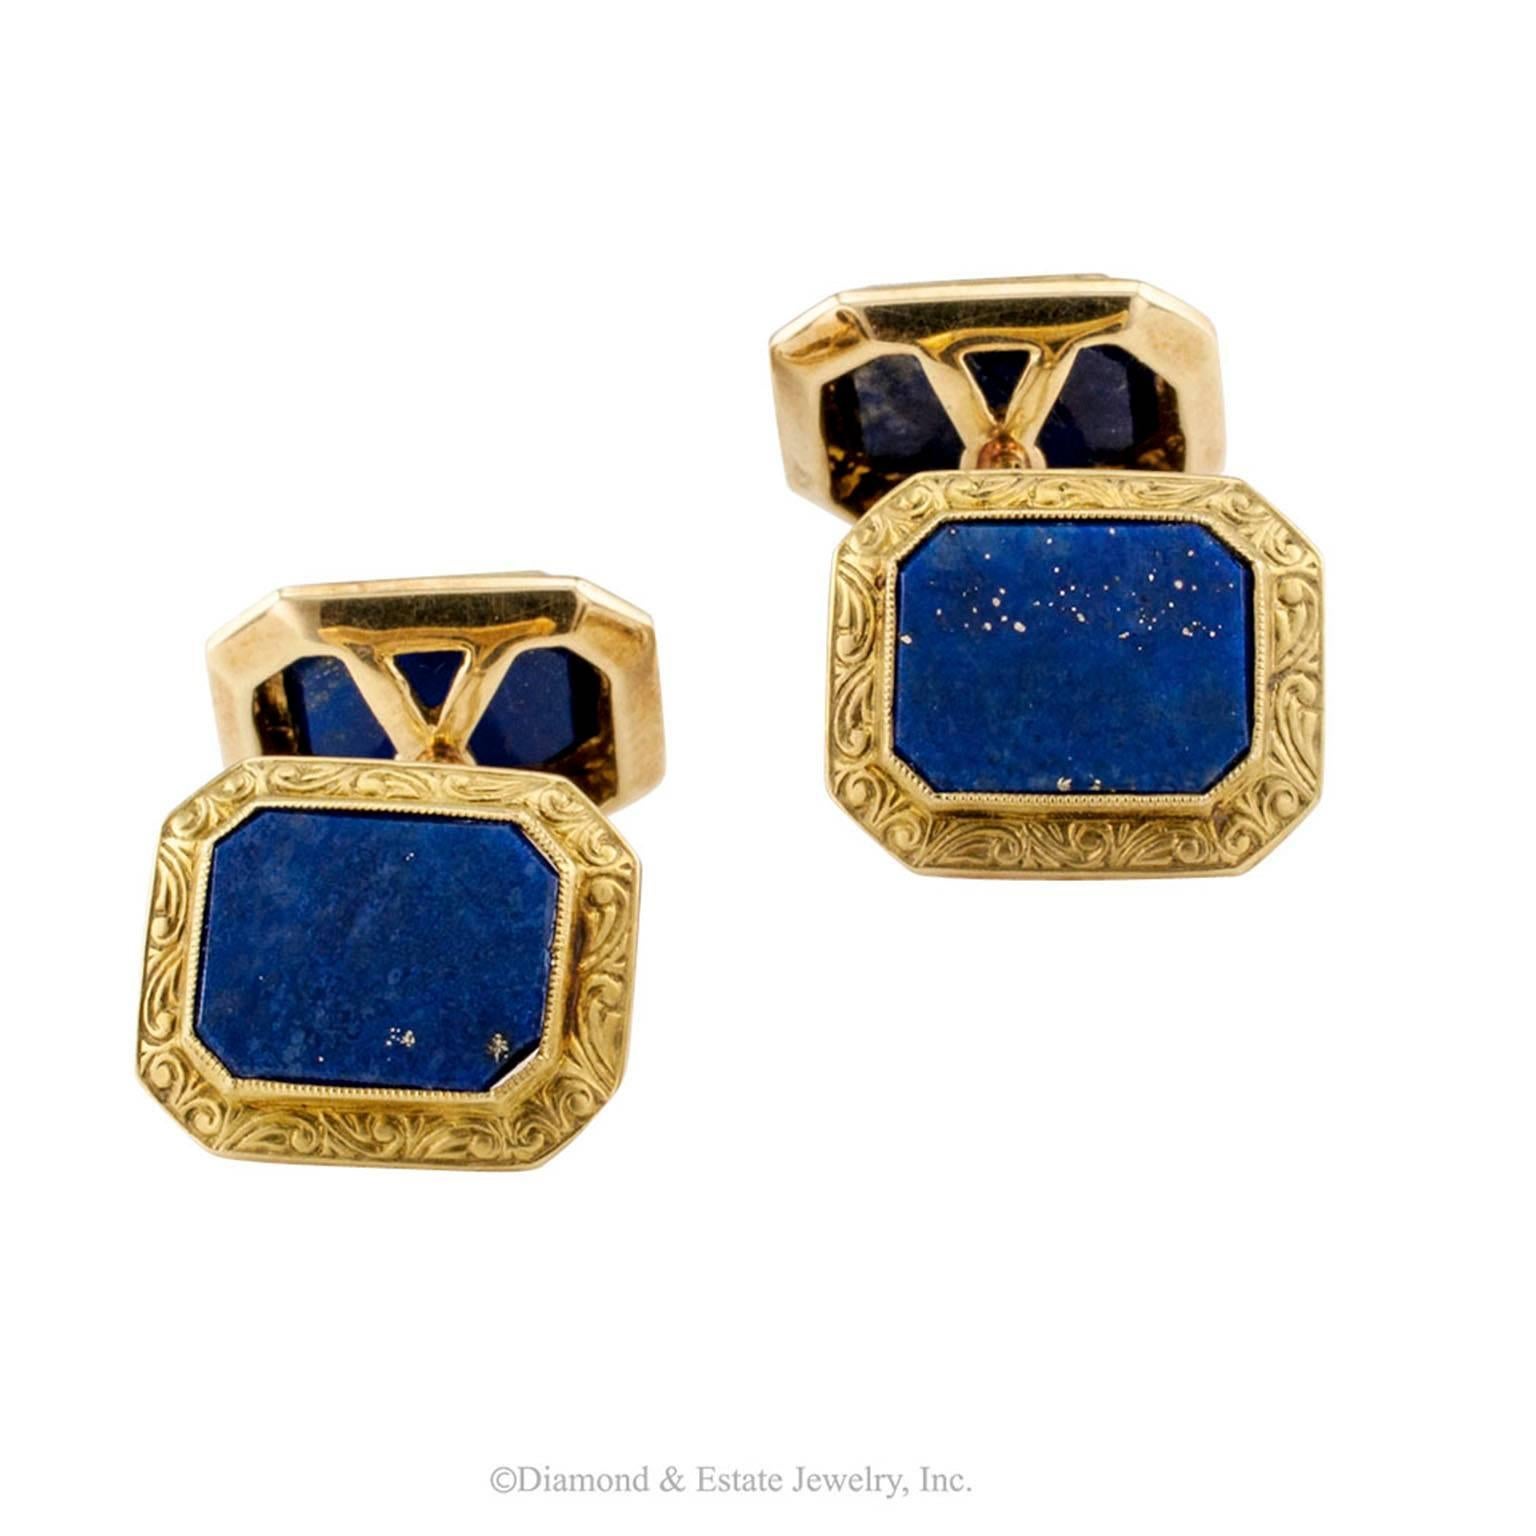 1930s Lapis Lazuli Gold Cuff Links

1930s lapis lazuli and gold cuff links.  The four-sided designs feature natural lapis lazuli rectangular faces within conforming, matte yellow gold borders intensified by classical, organic motifs in relieve. 